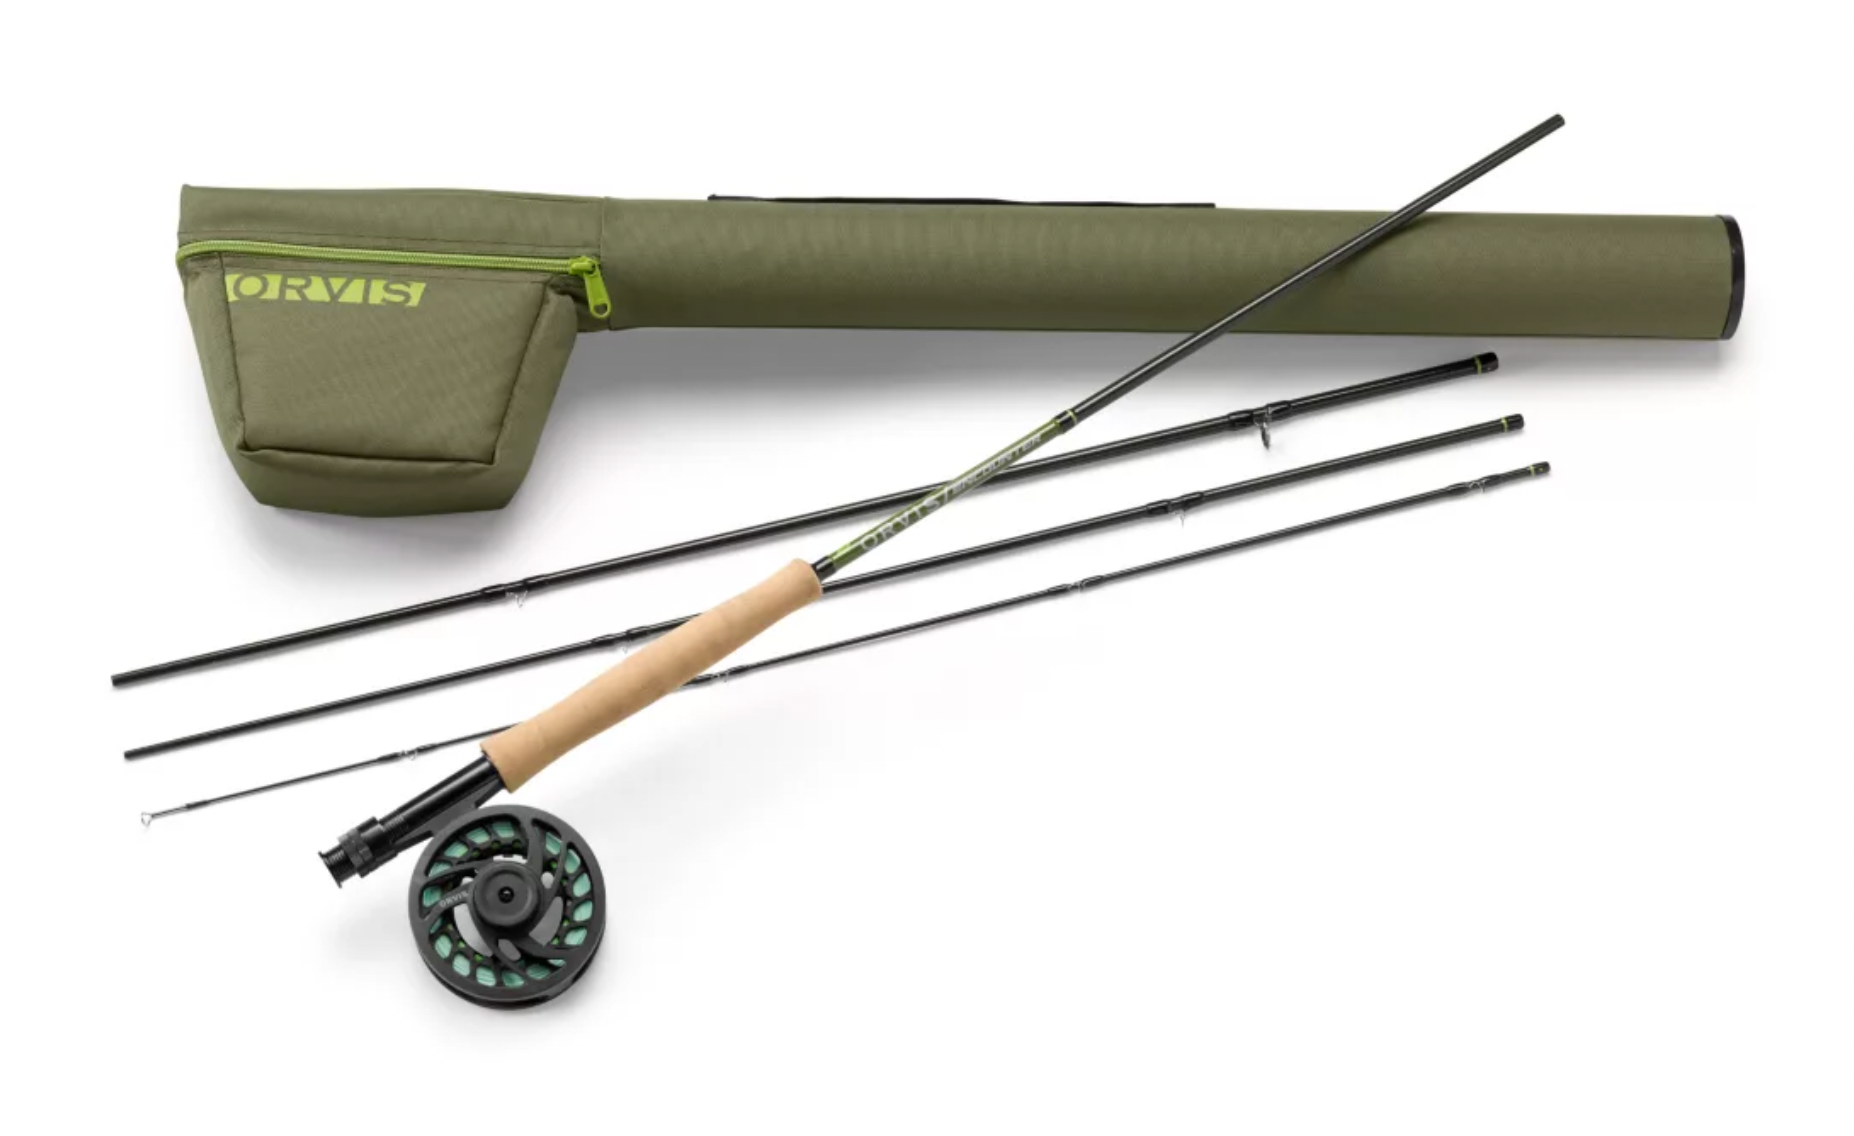 I recently purchased a 9ft 5wt Orvis Clearwater outfit, over the